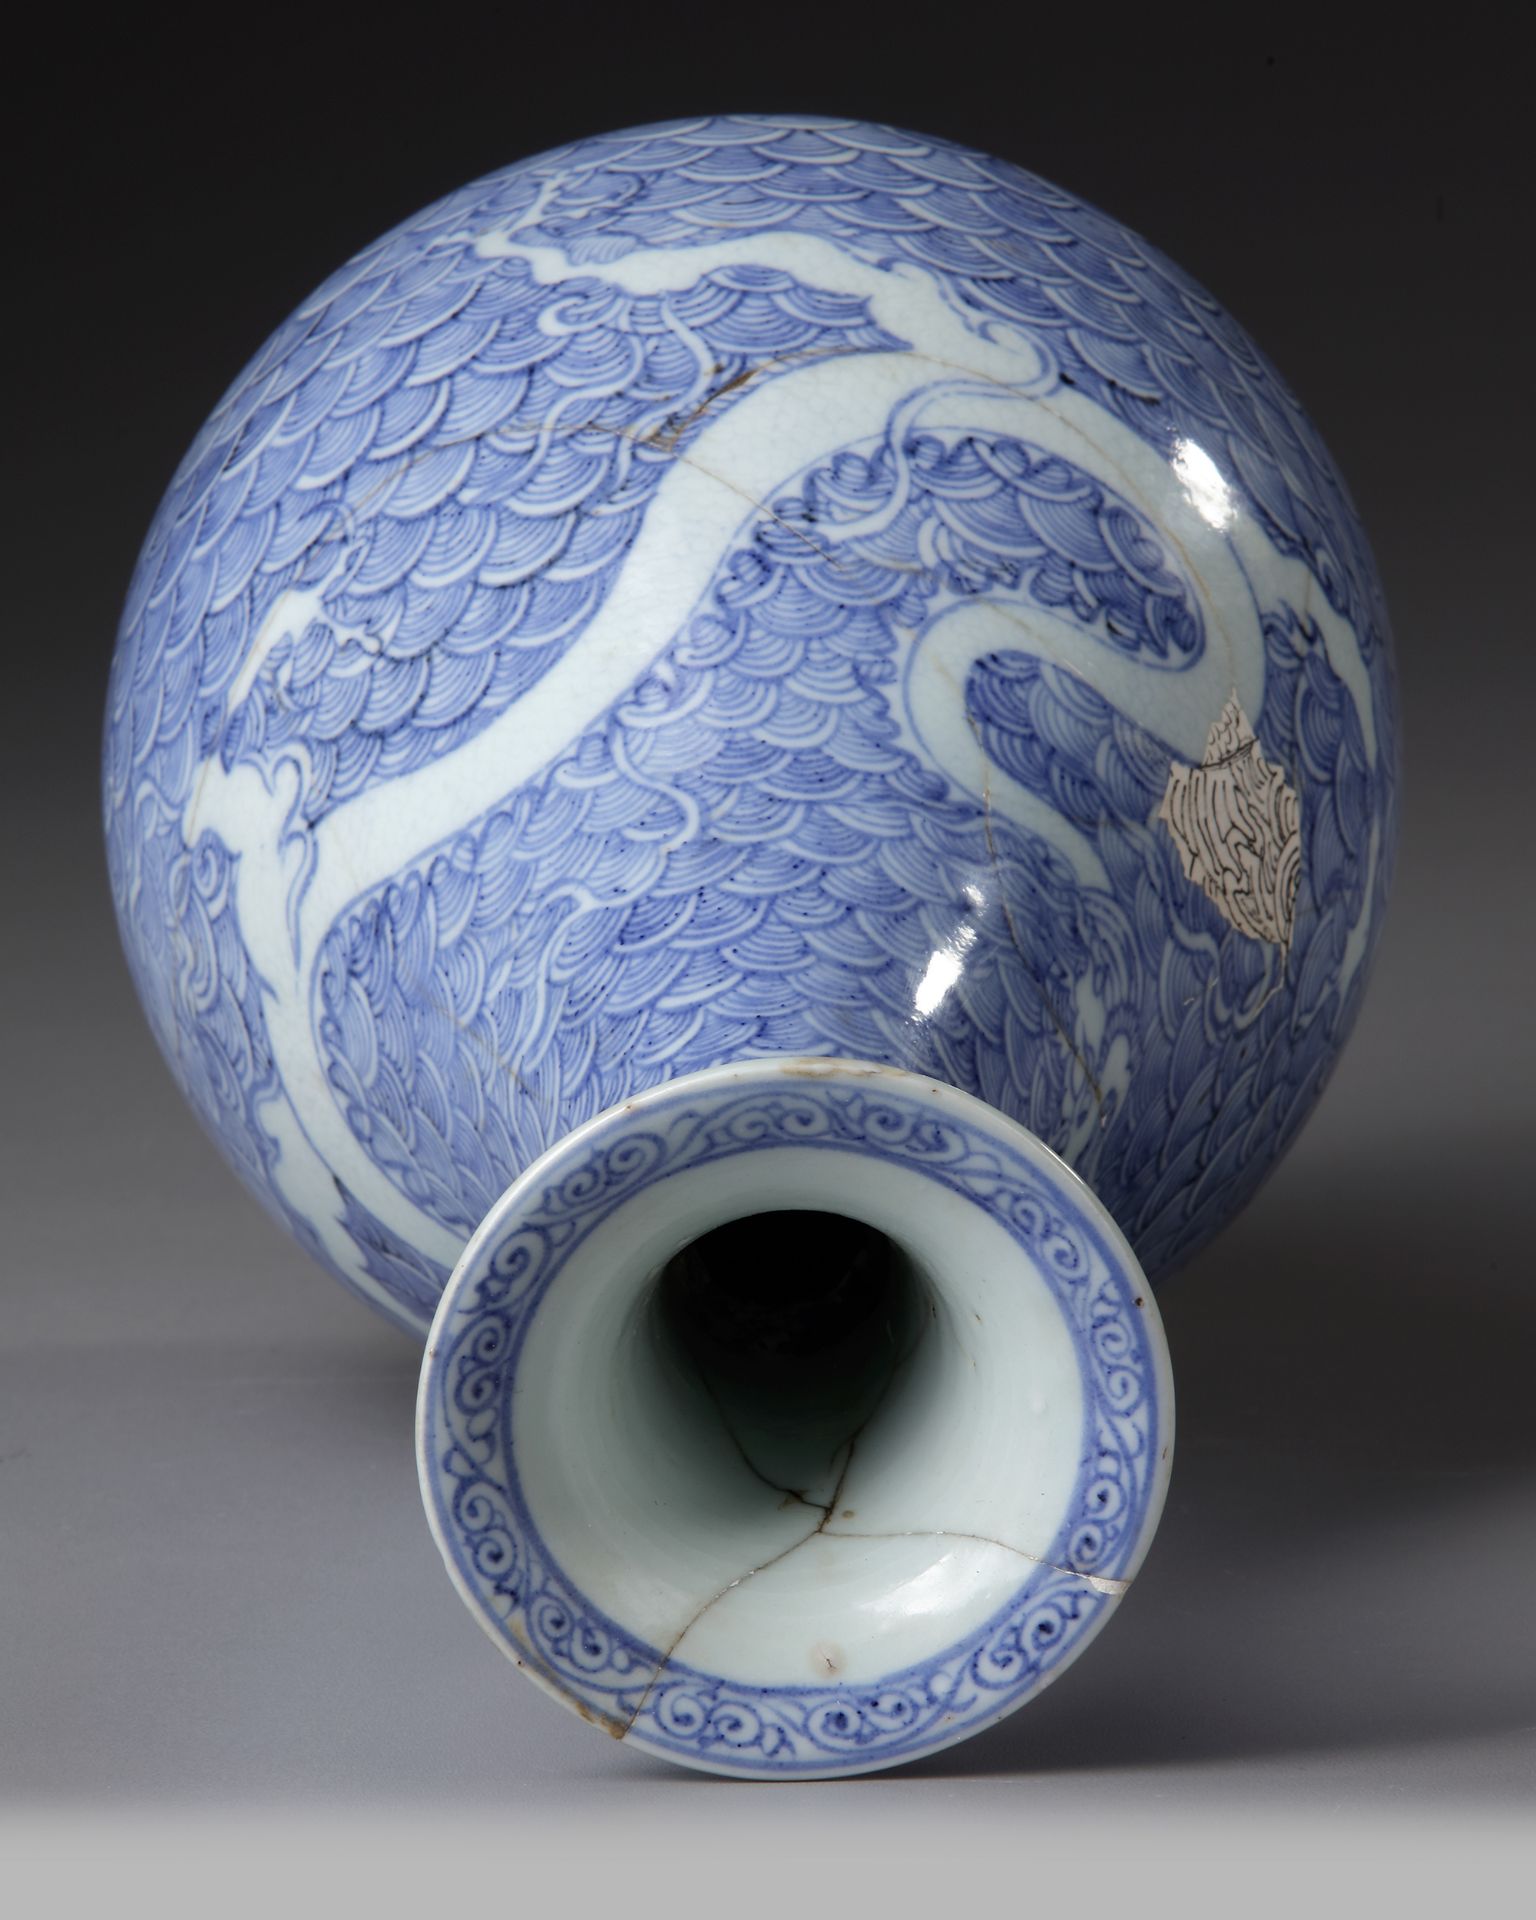 A CHINESE BLUE AND WHITE DRAGON VASE, QING DYNASTY (1644–1911) - Image 3 of 4